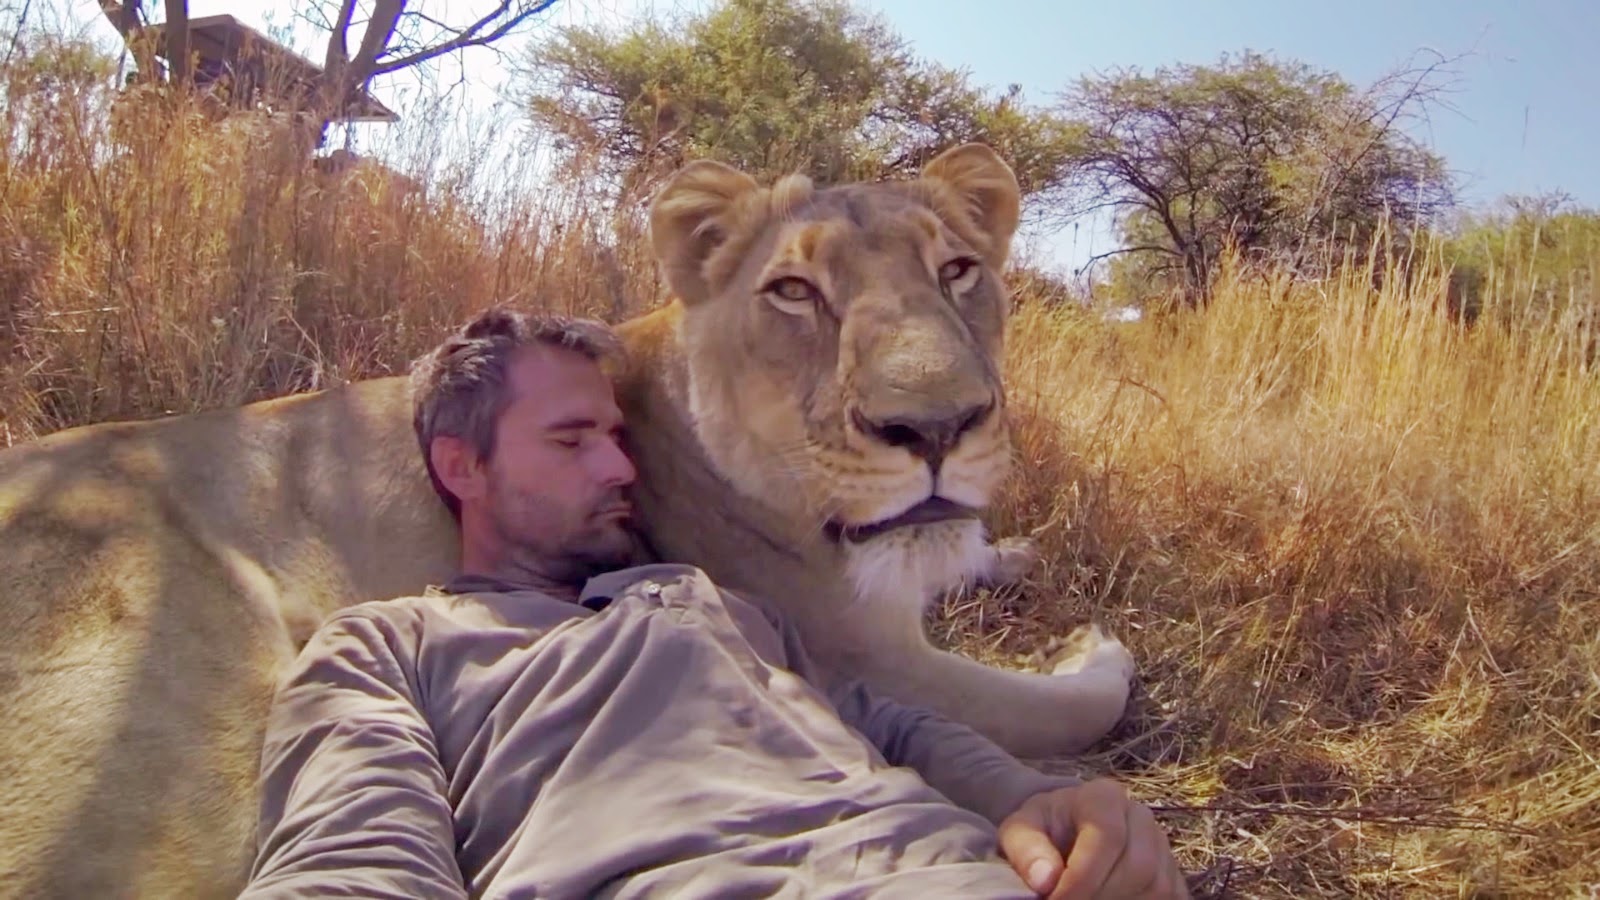 Man Tries to Hug a Wild Lion, You Won’t Believe What Happens Next!